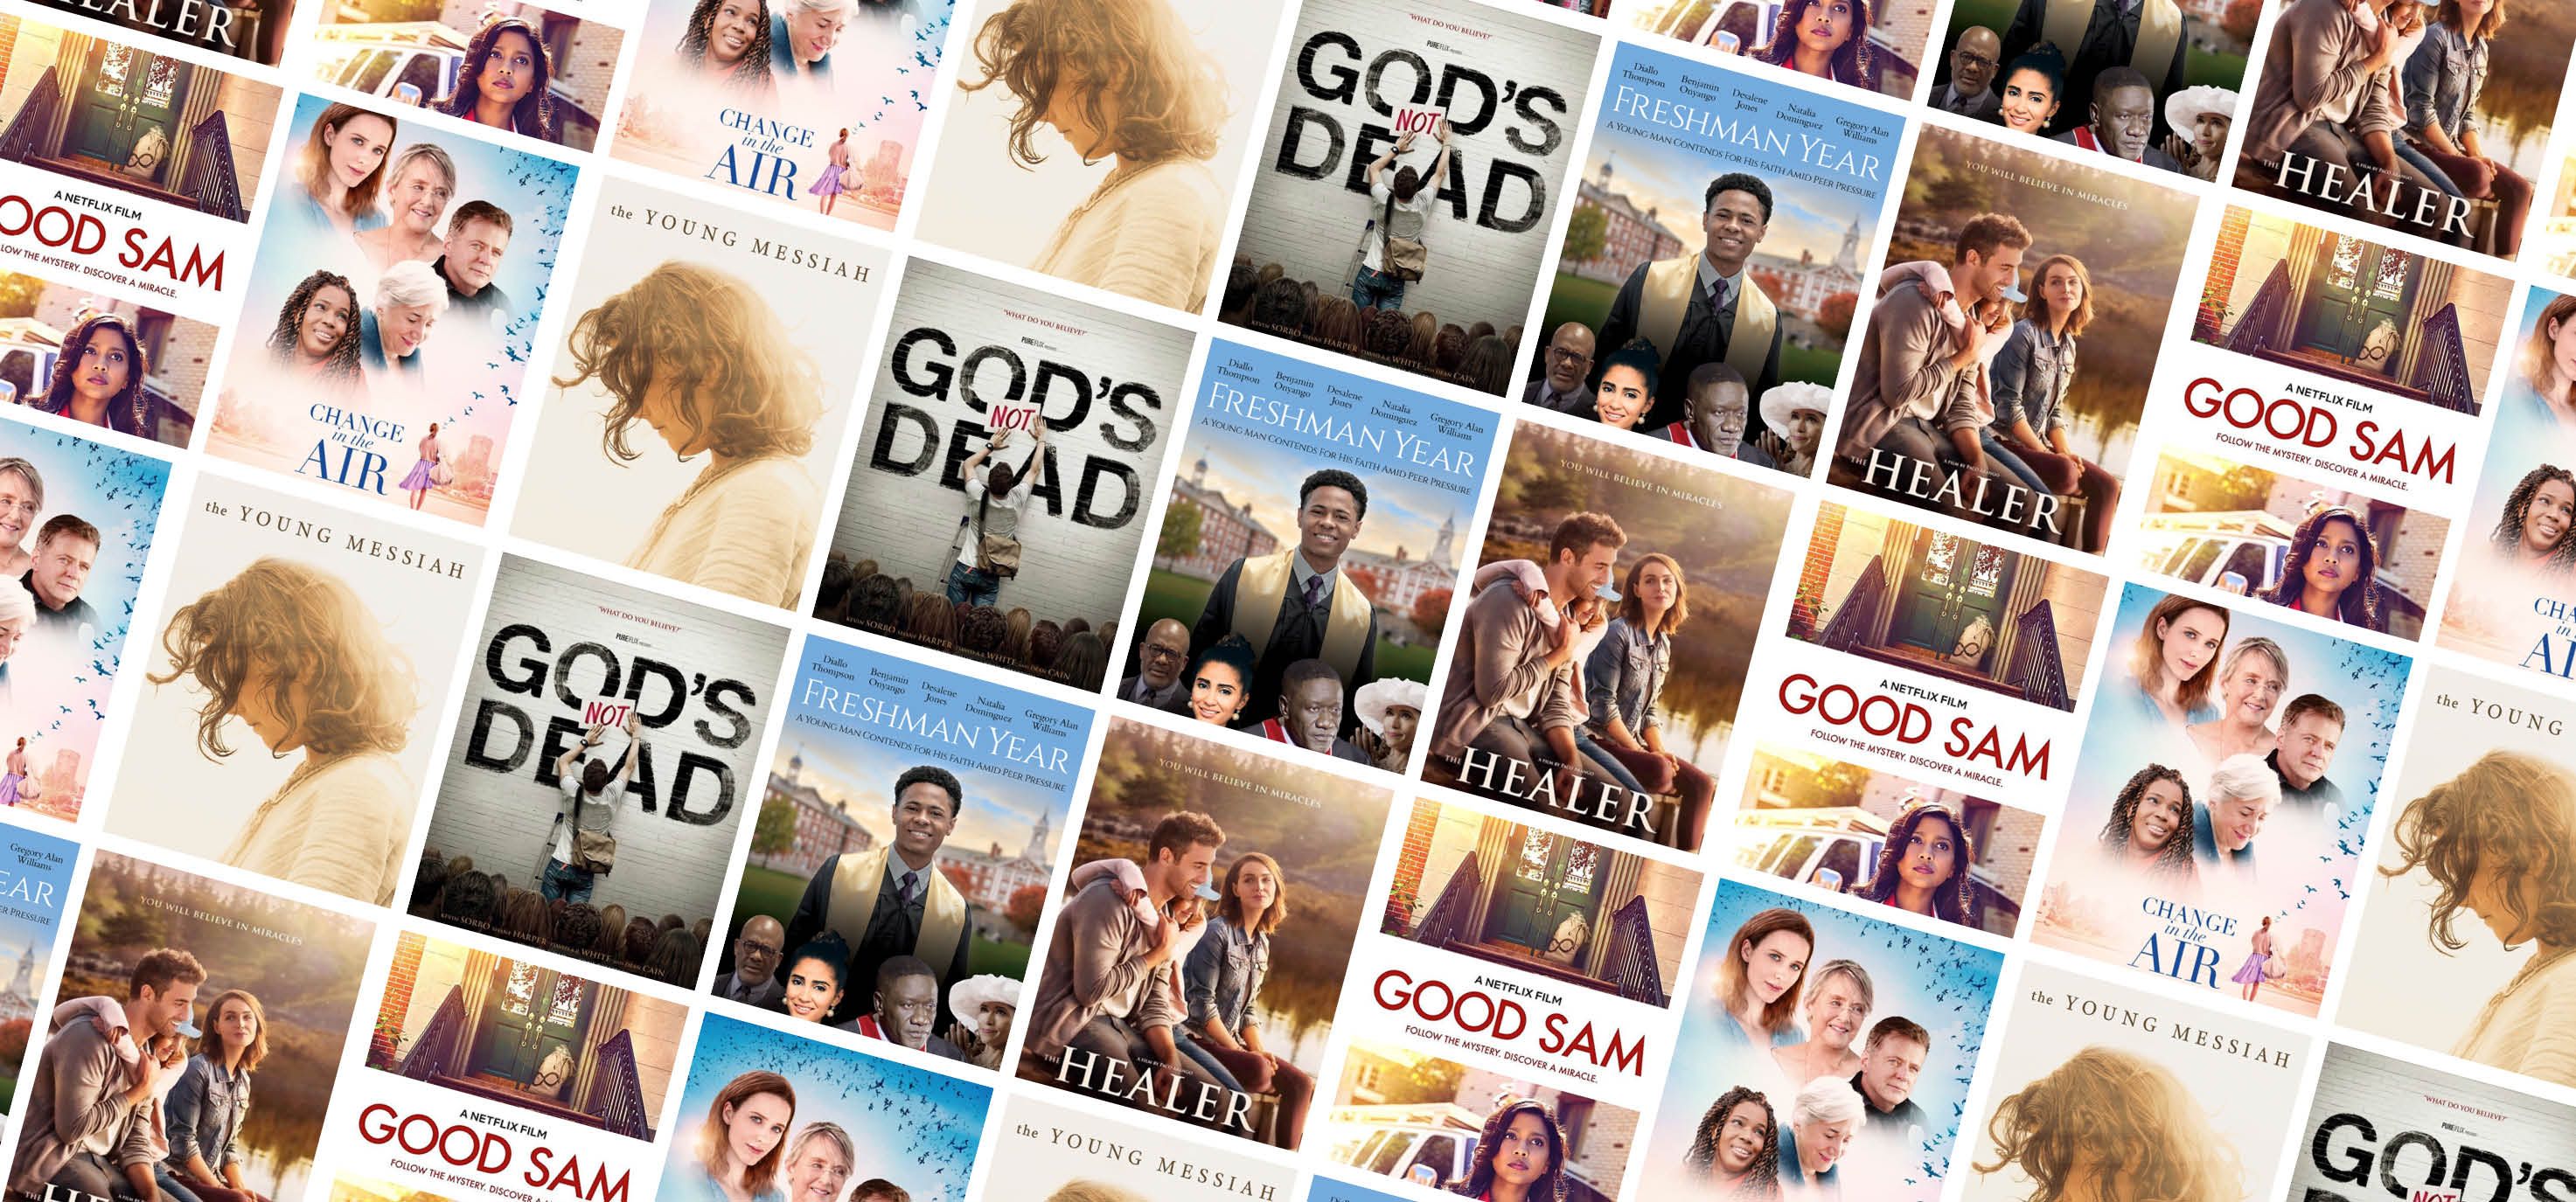 watch christian movies online for free without downloading